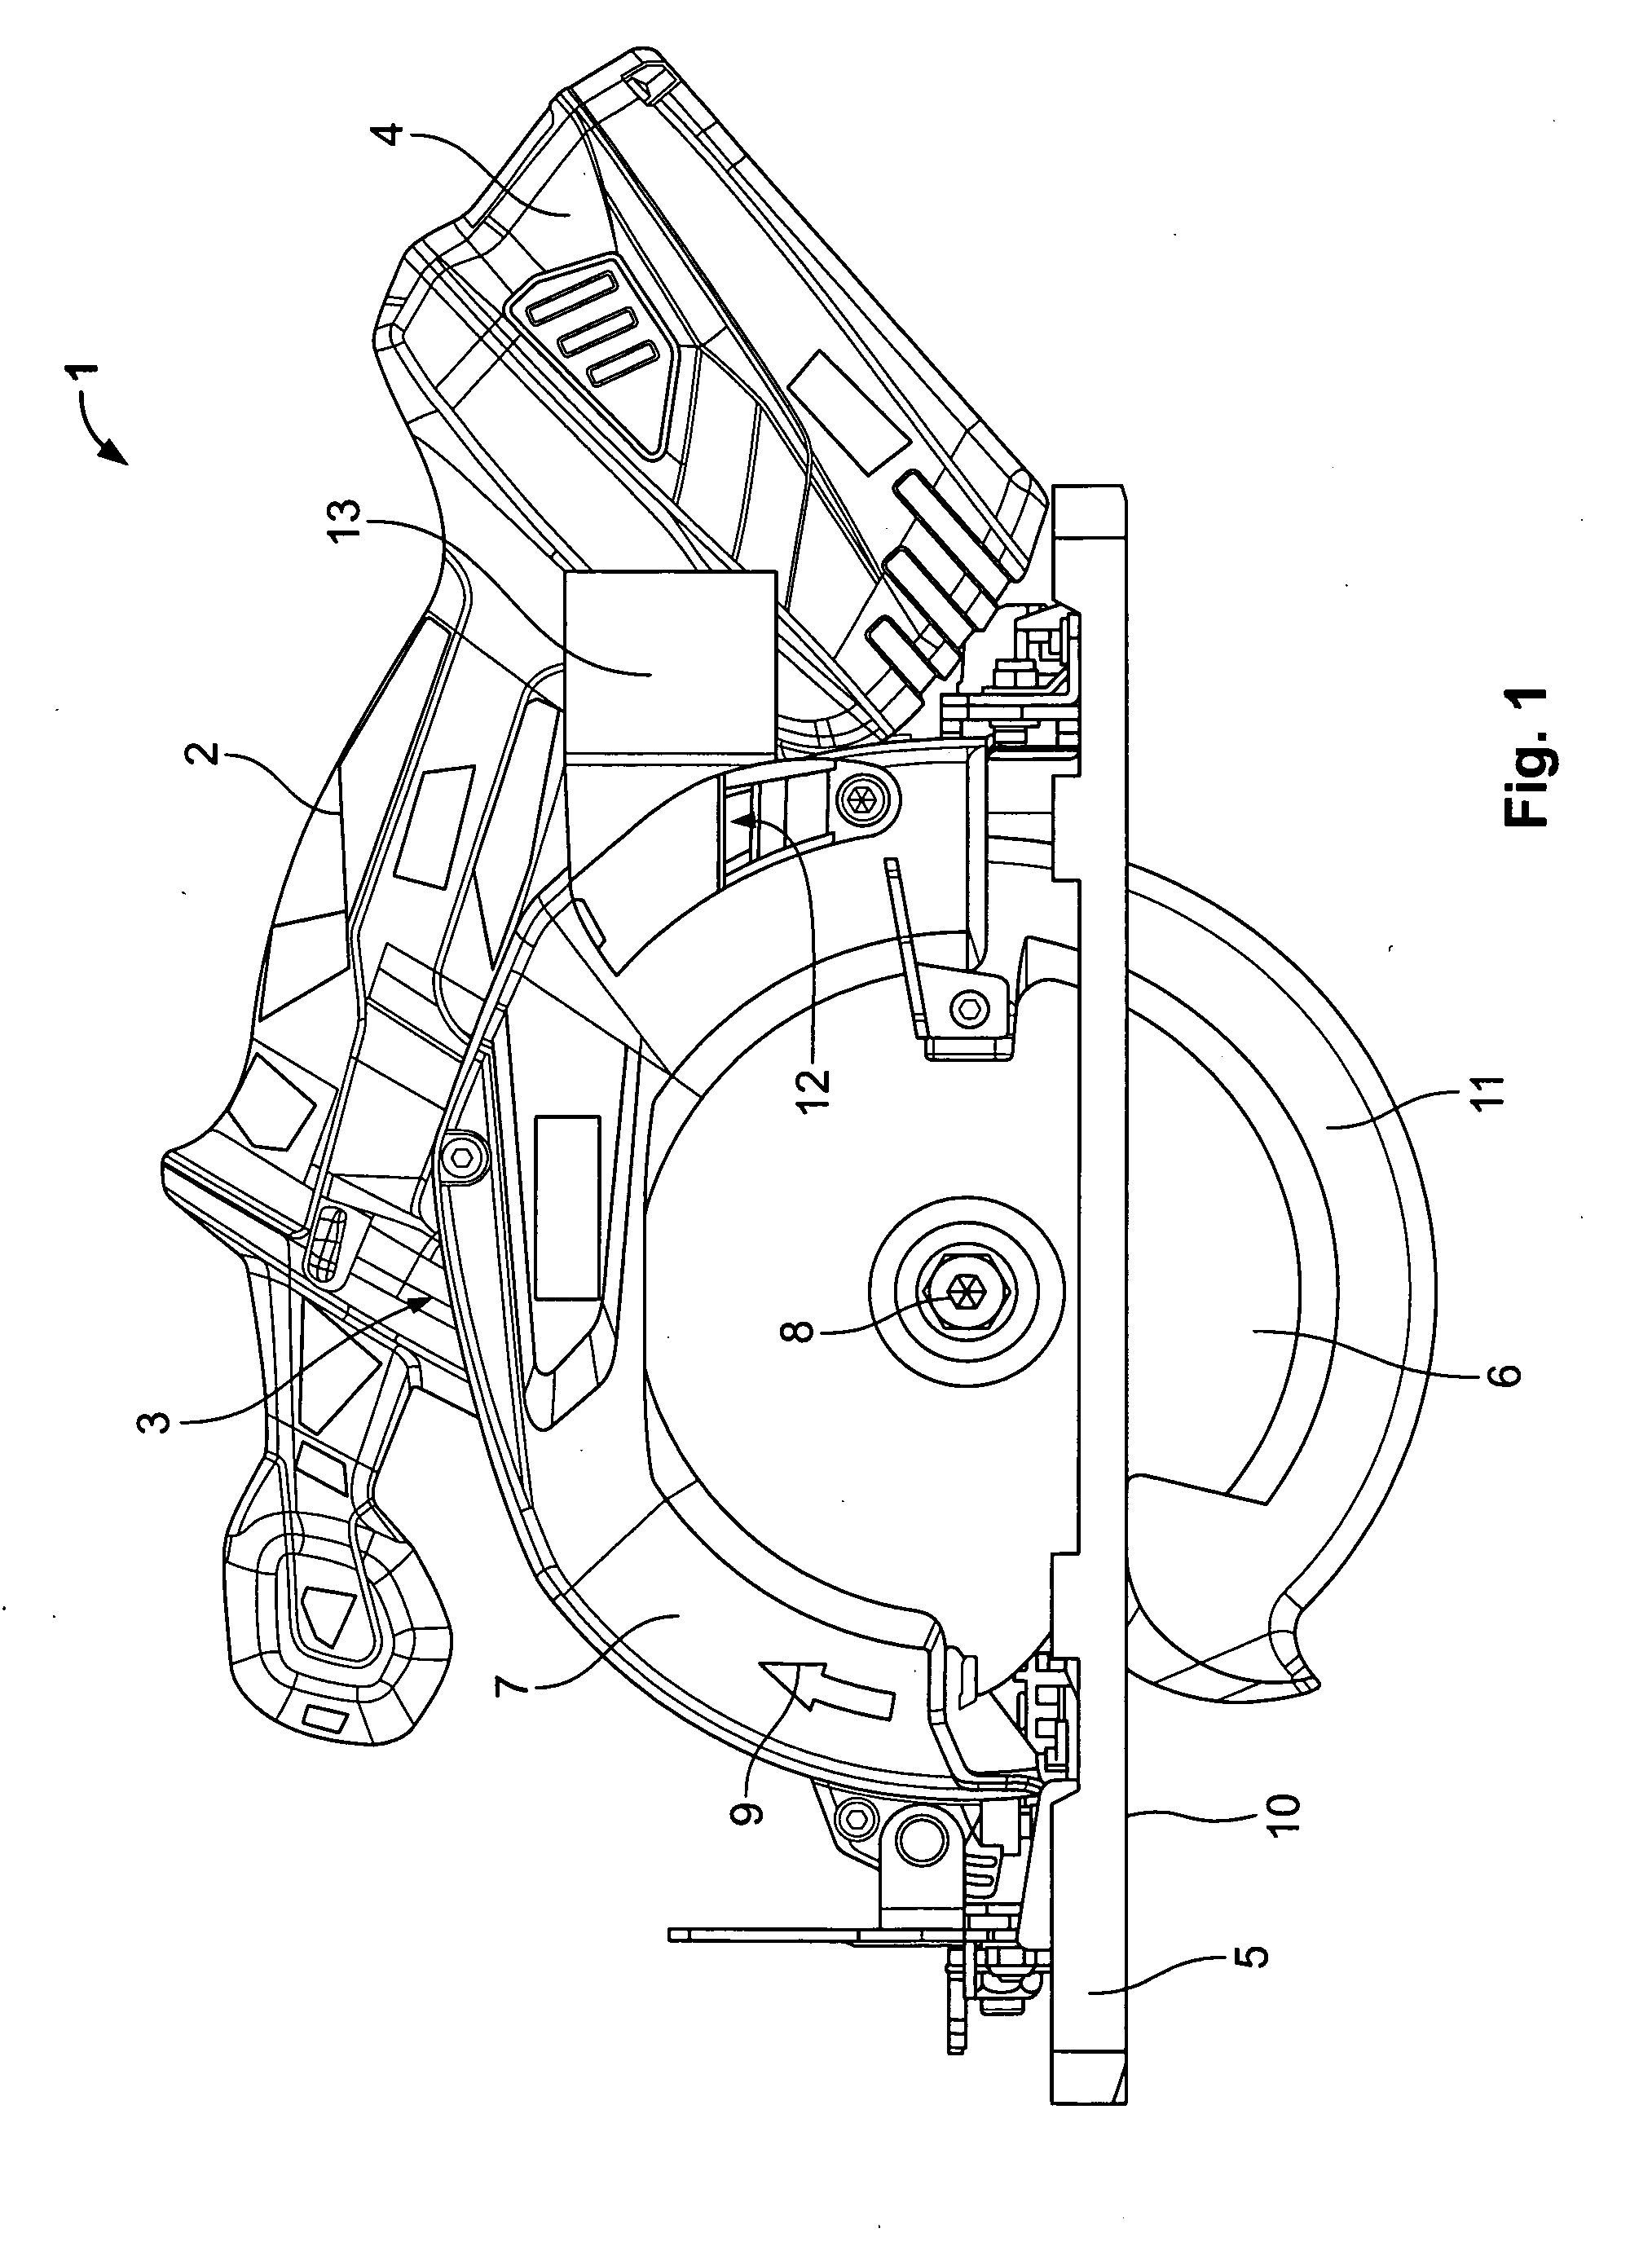 Hand-held electric power tool with a suction adapter